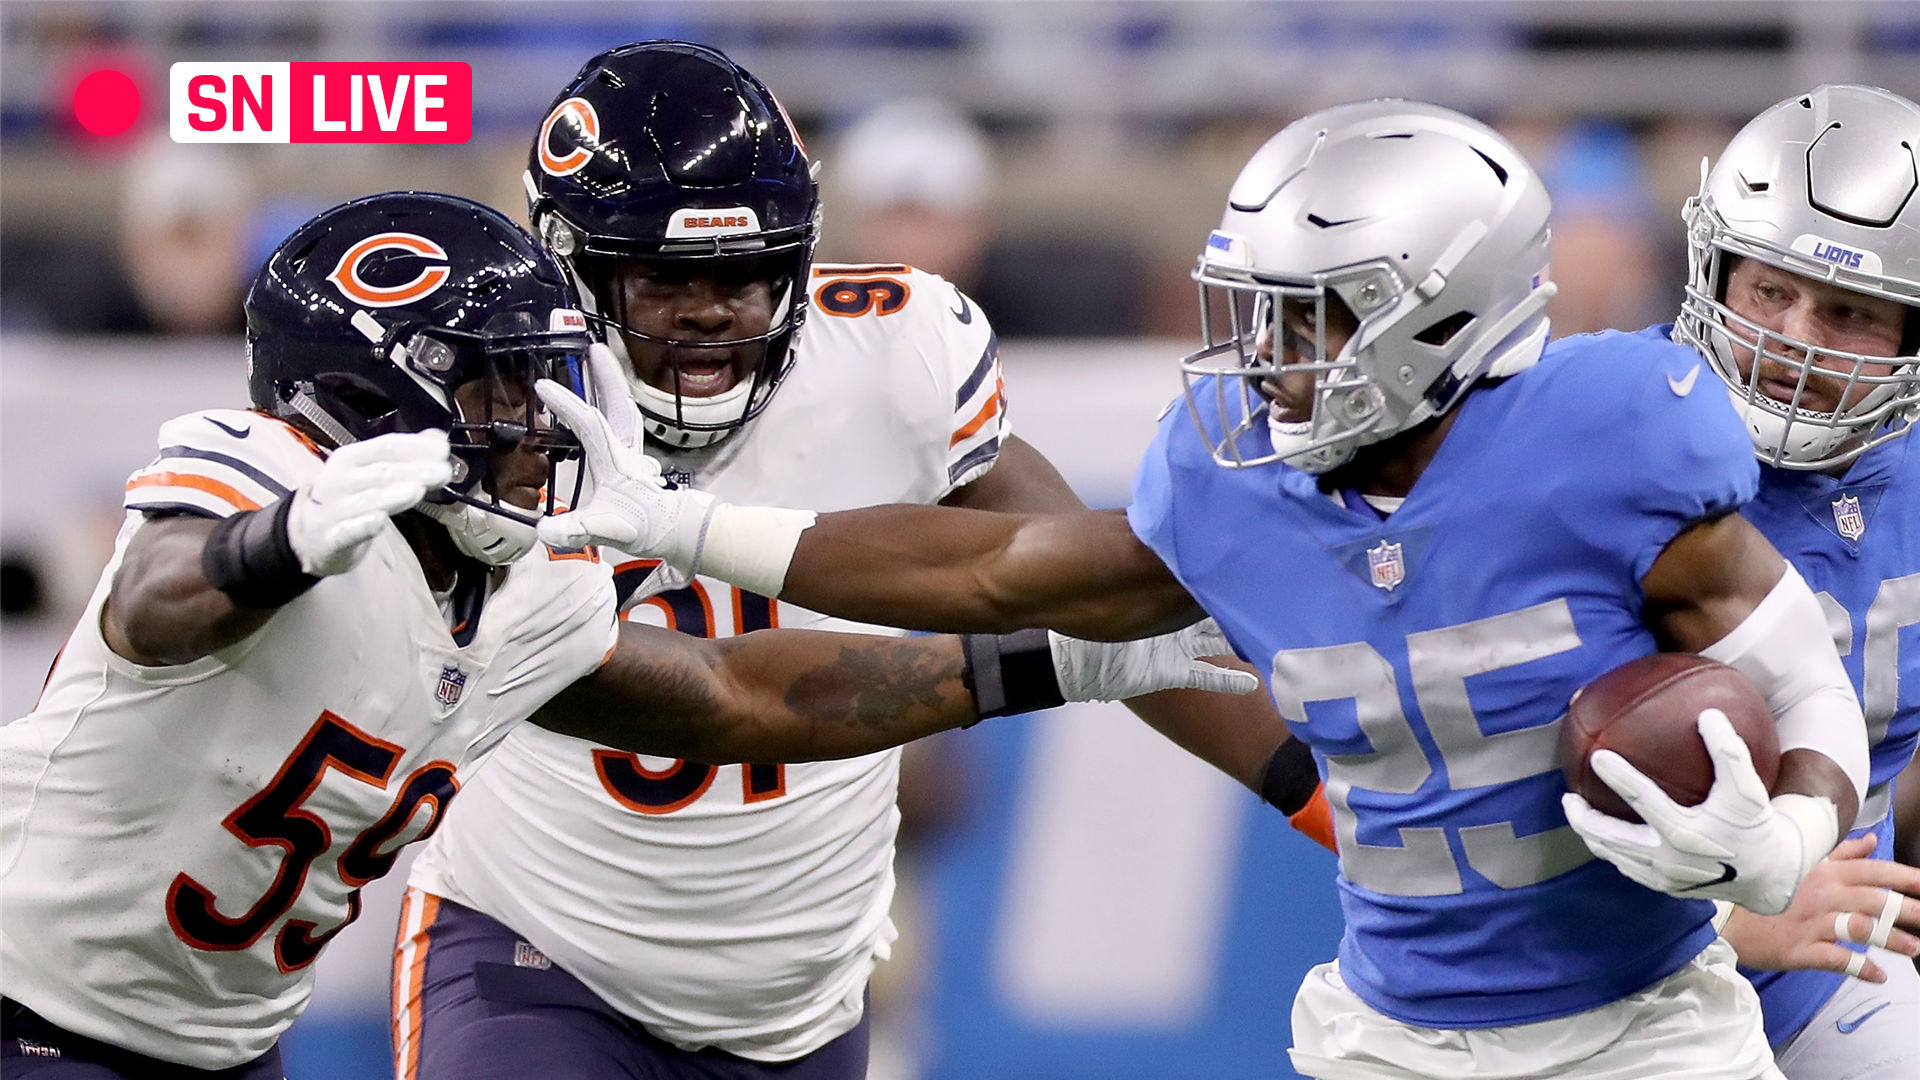 Bears vs. Lions Score, live updates from Thanksgiving game in Detroit